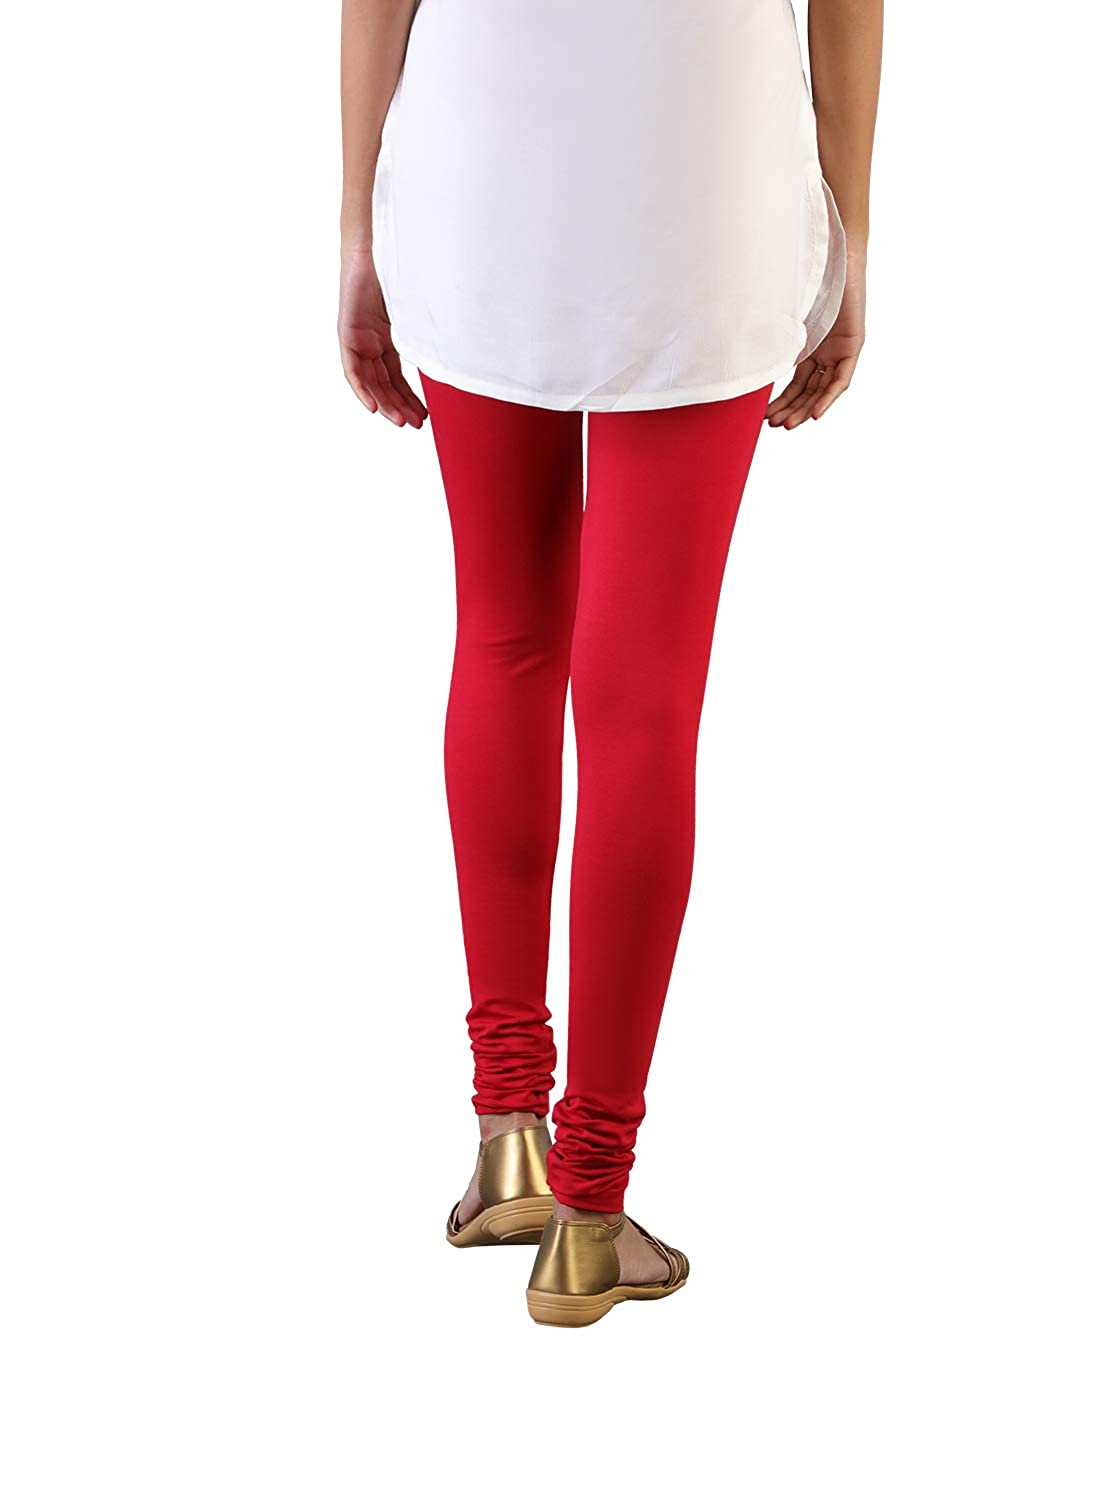 Buy Candle Light & Sand Storm Leggings for Women by Twin Birds Online |  Ajio.com